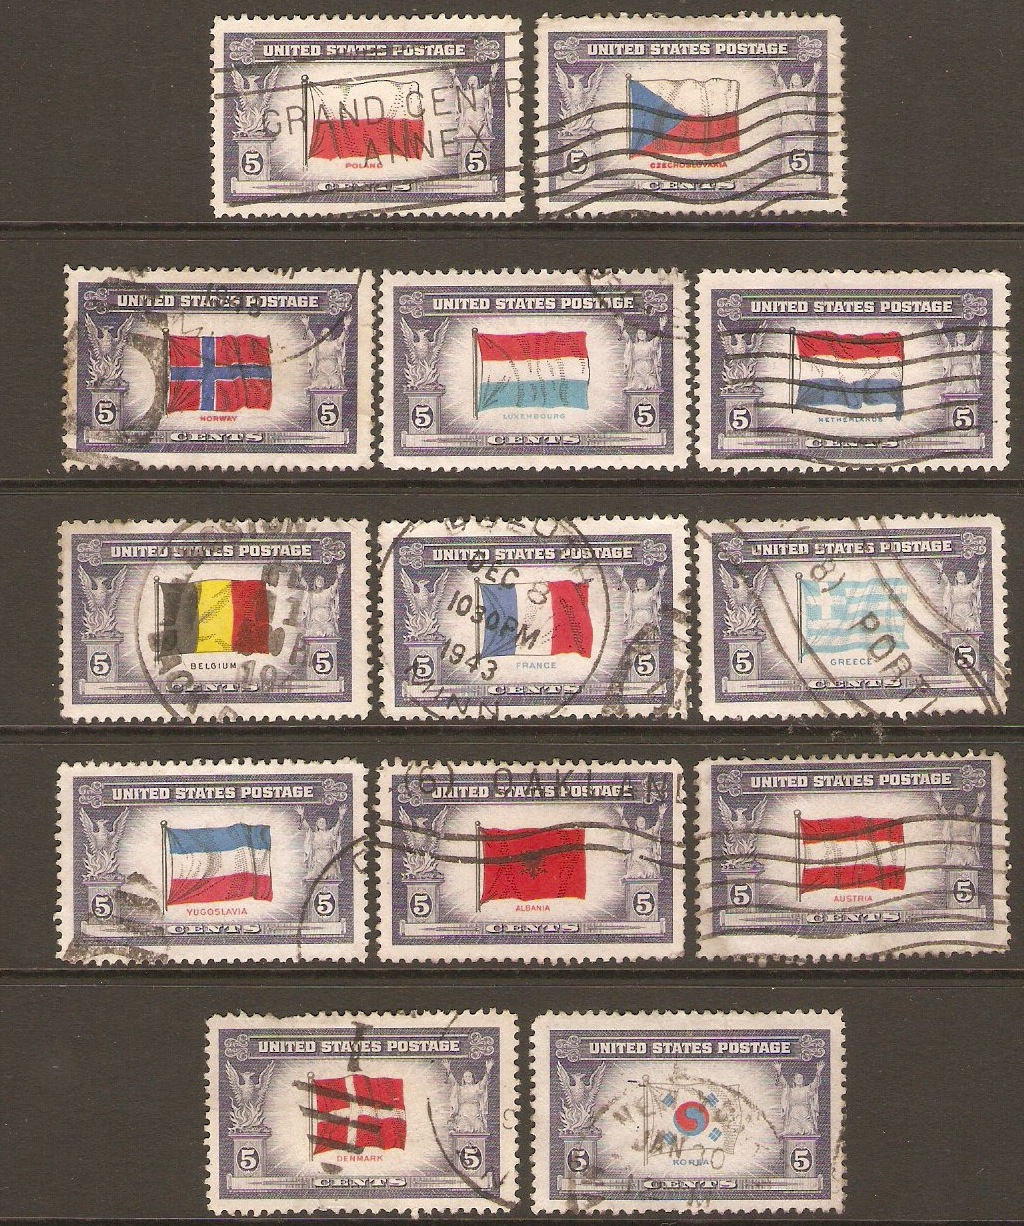 United States 1943 Flags of Oppressed Nations set. SG906-SG918.